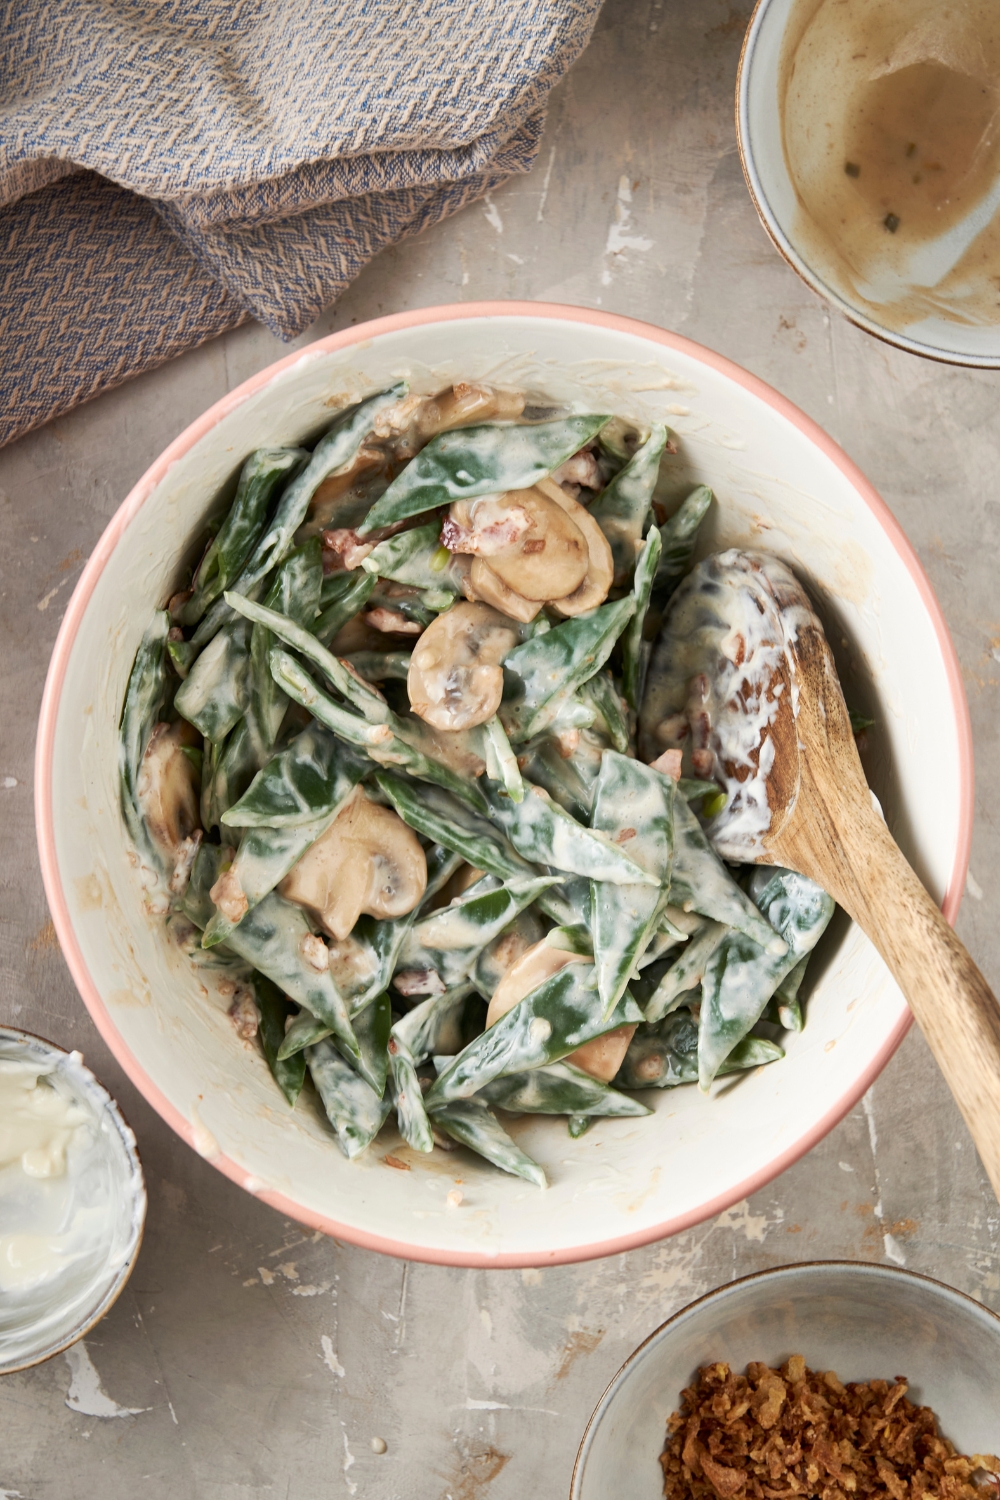 A white bowl full of green beans, mushrooms, and cream soup sit on a gray counter. A wooden spoon rests in the bowl.